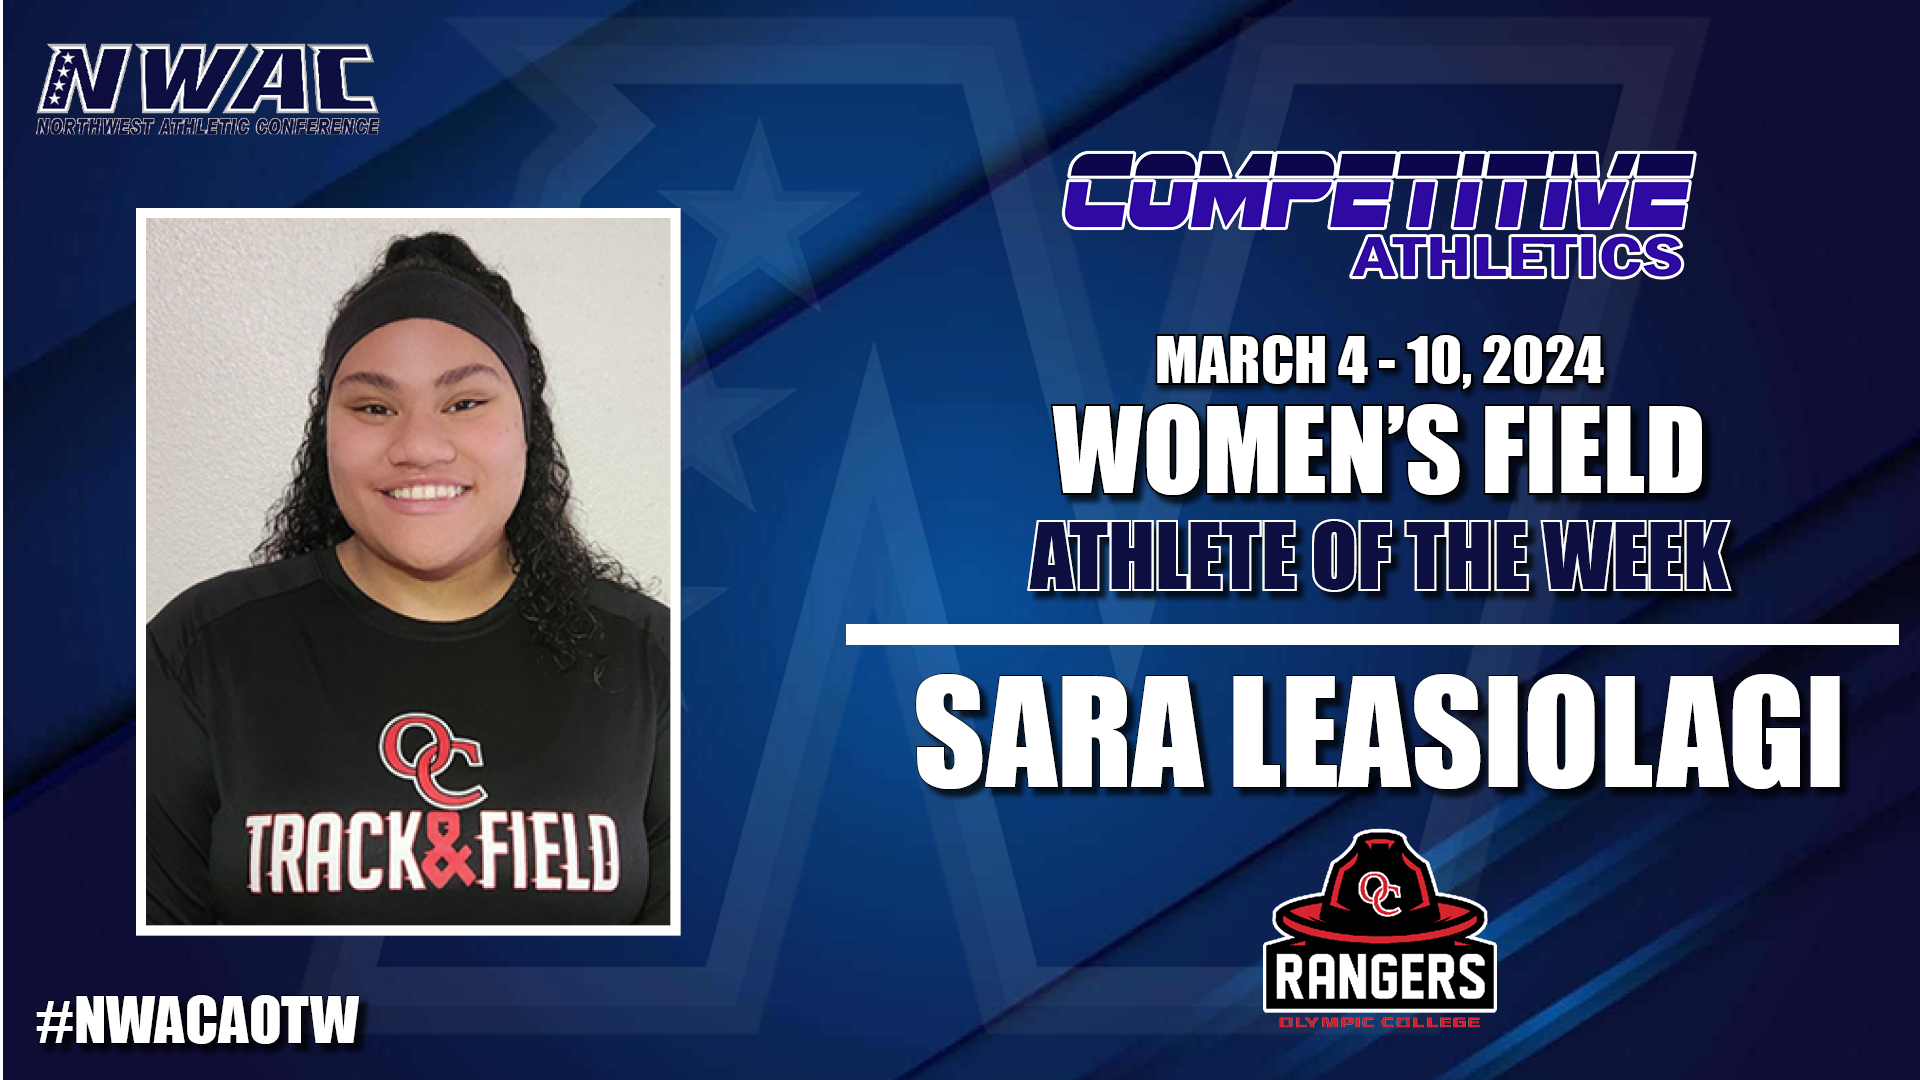 Competitive Athletics, March 4-10
Women's Field
Athlete of the Week
Sara Leasiolagi
#NWACAOTW